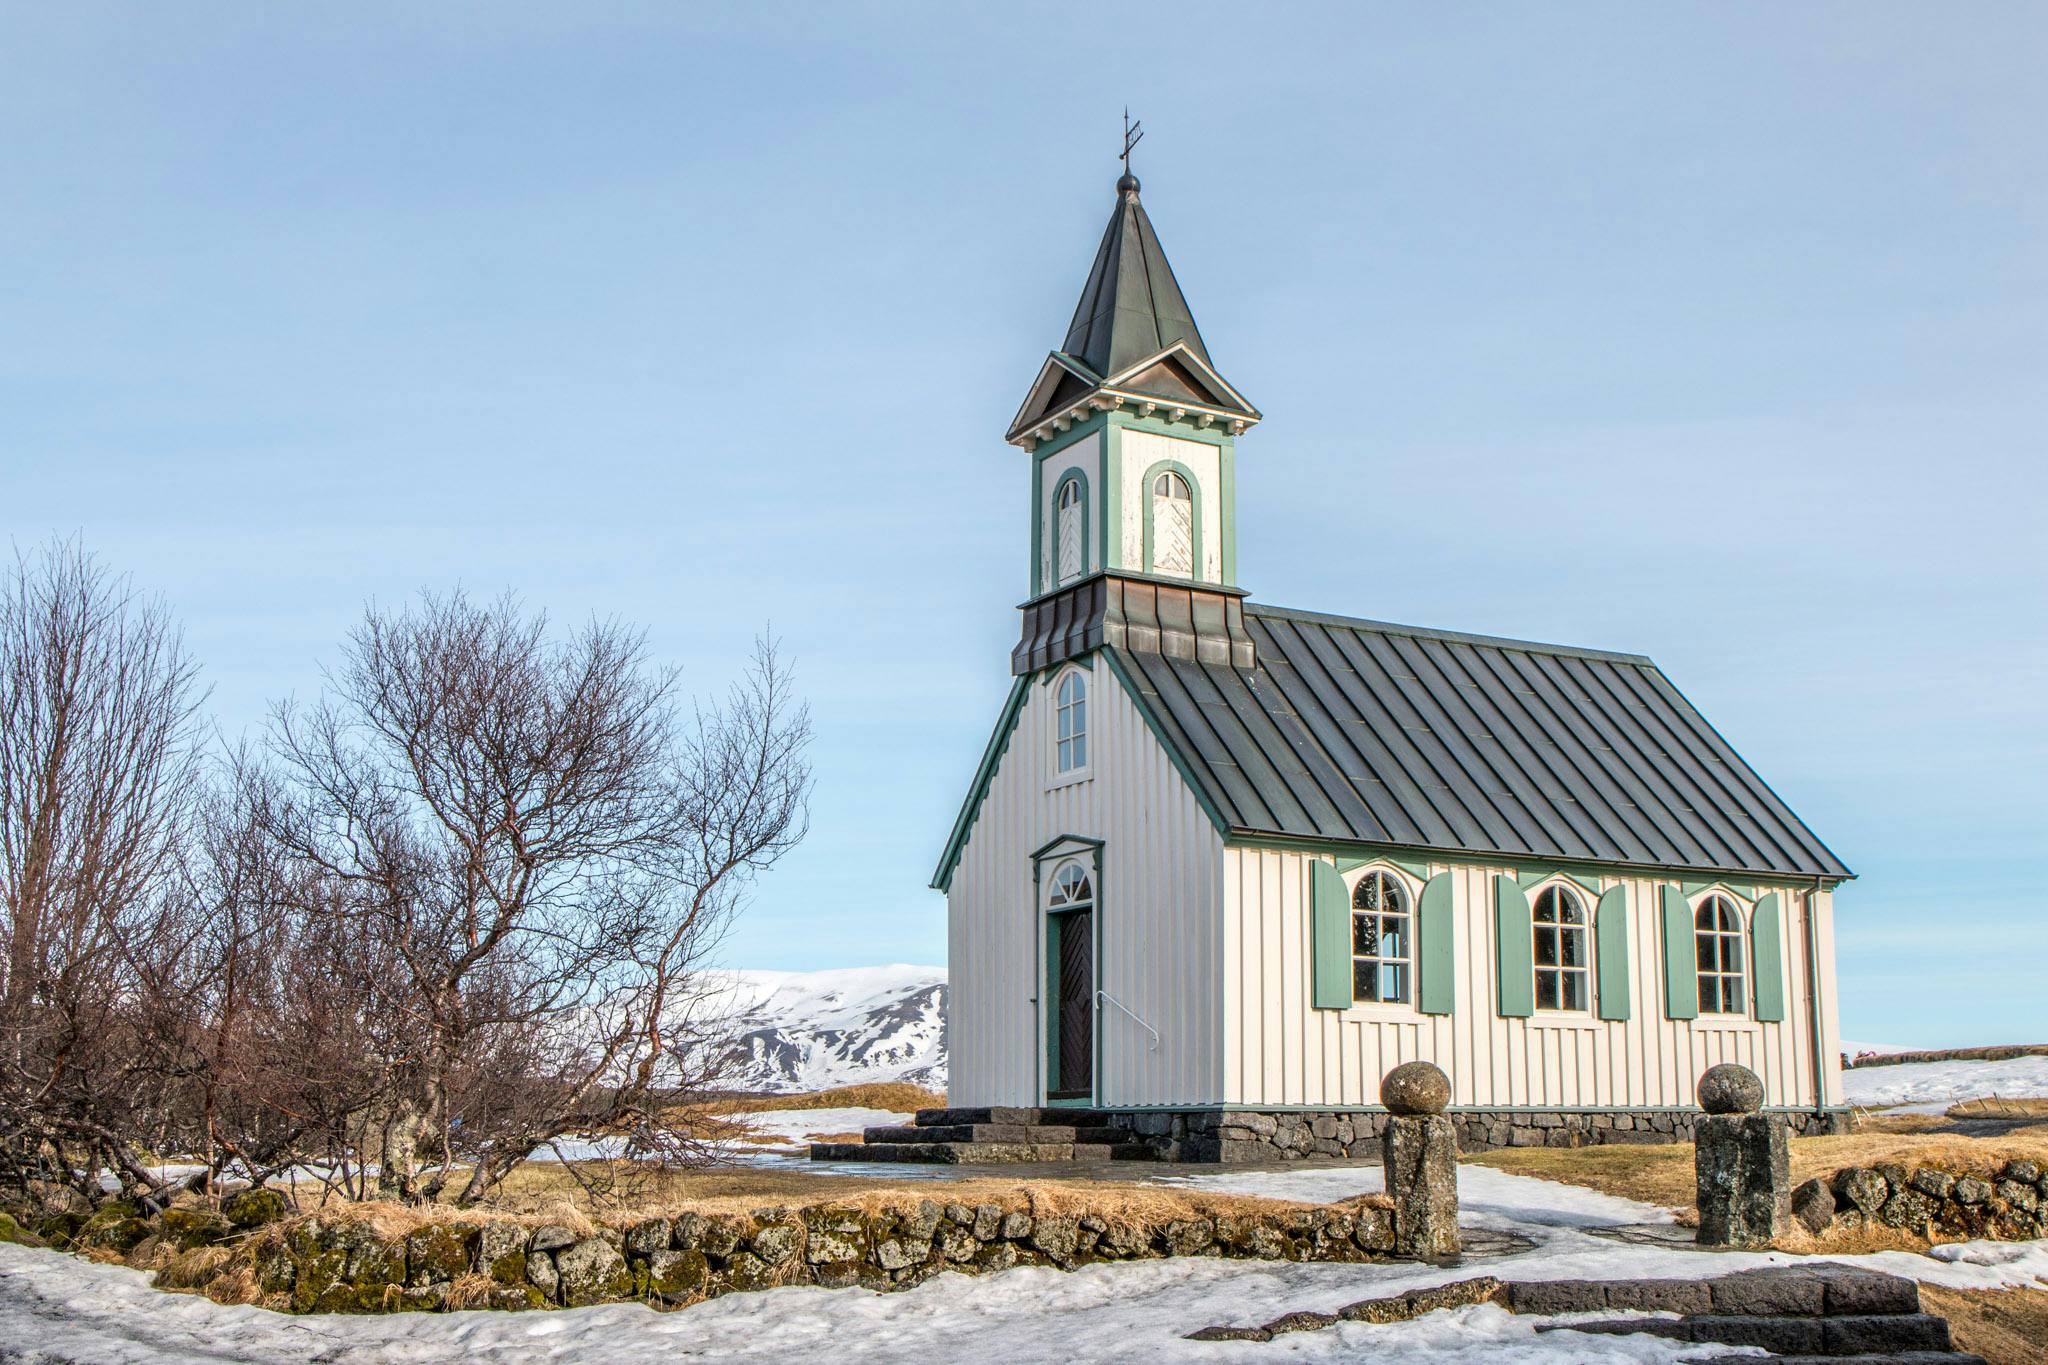 Image - The churches of Iceland in pictures